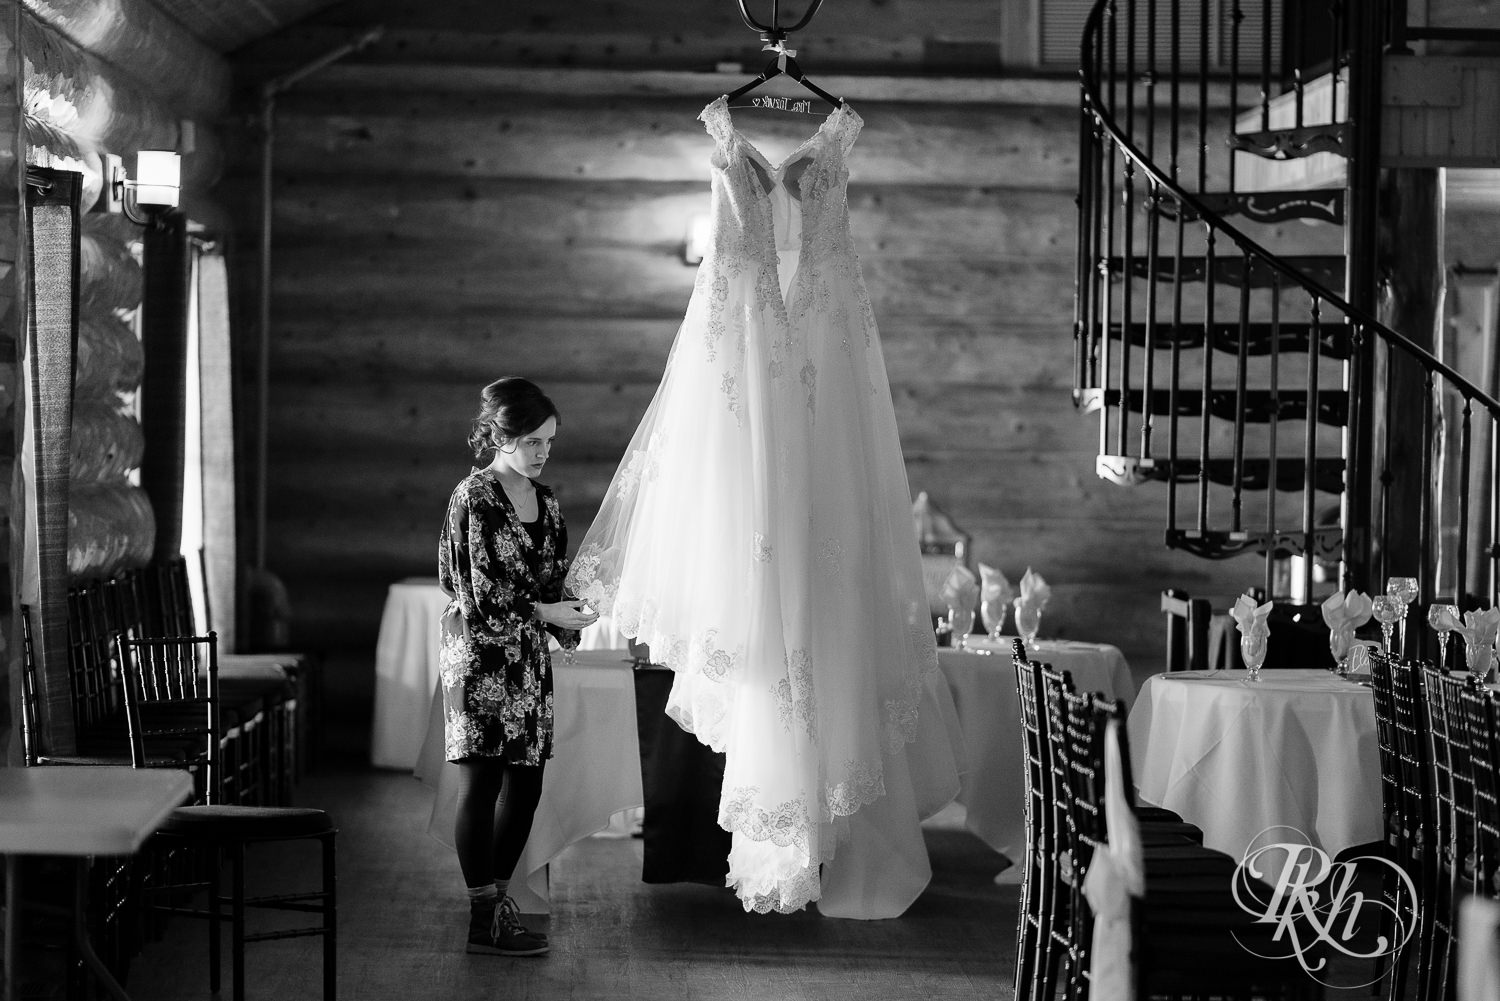 Maid of honor hanging dress for winter wedding at Glenhaven Events in Farmington, Minnesota.